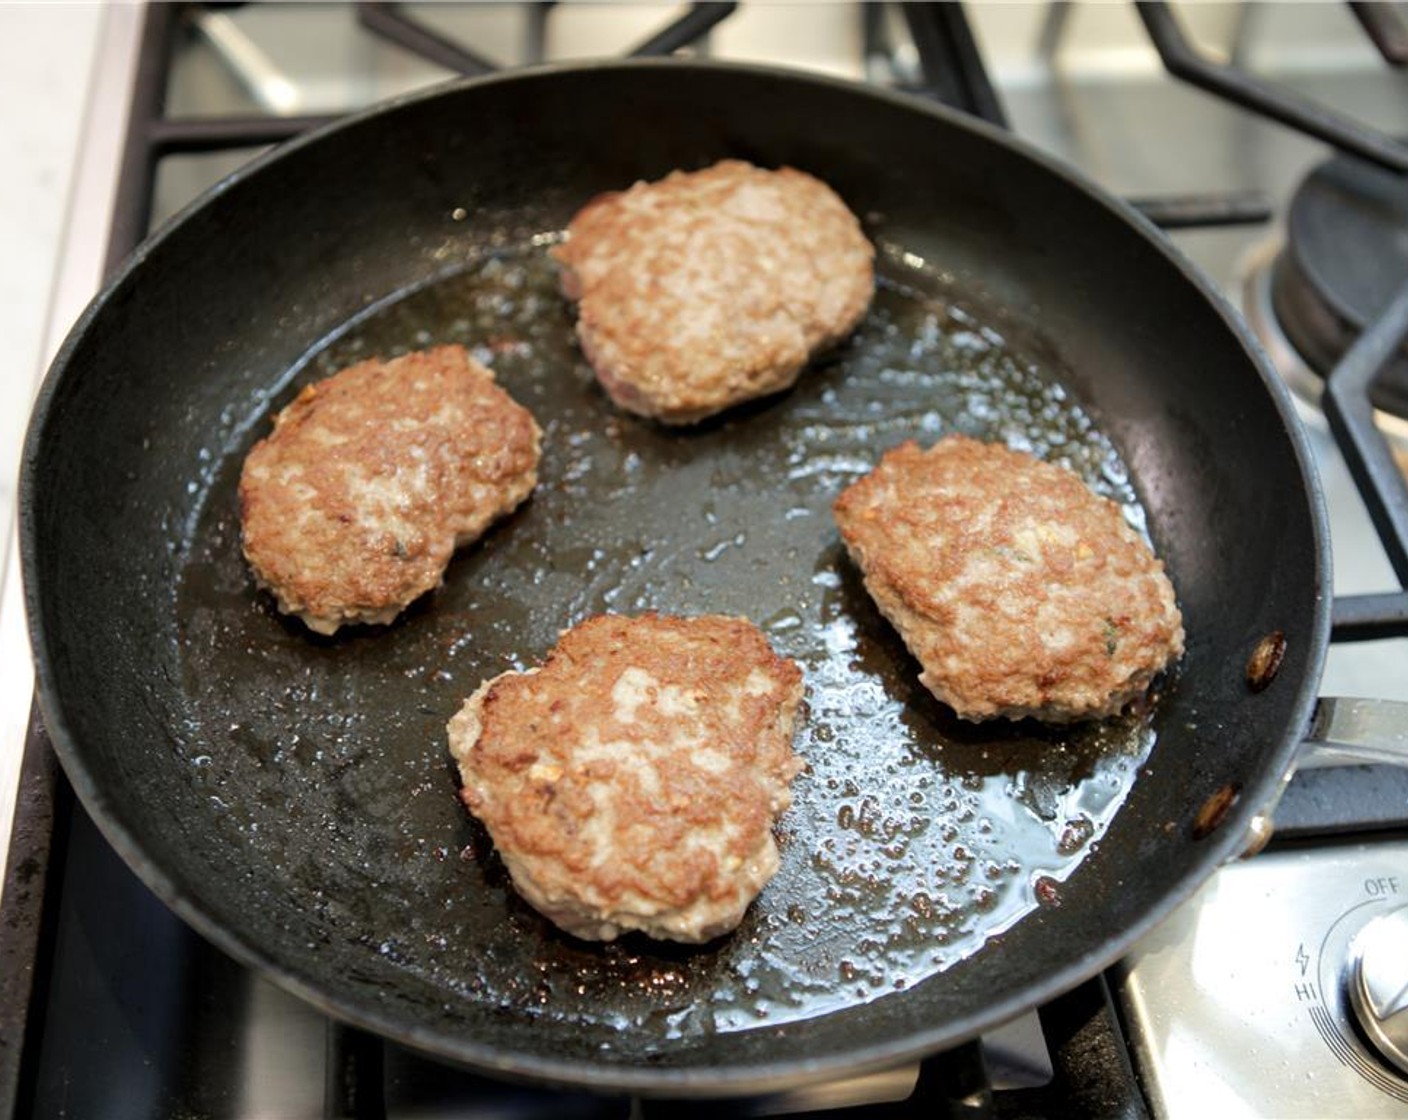 step 9 Cook for 3-4 minutes, or until golden brown on the first side, and a bit of liquid has started to bubble through the top of the patties. Flip and cook for 1-2 additional minutes, or until the second side is golden brown.